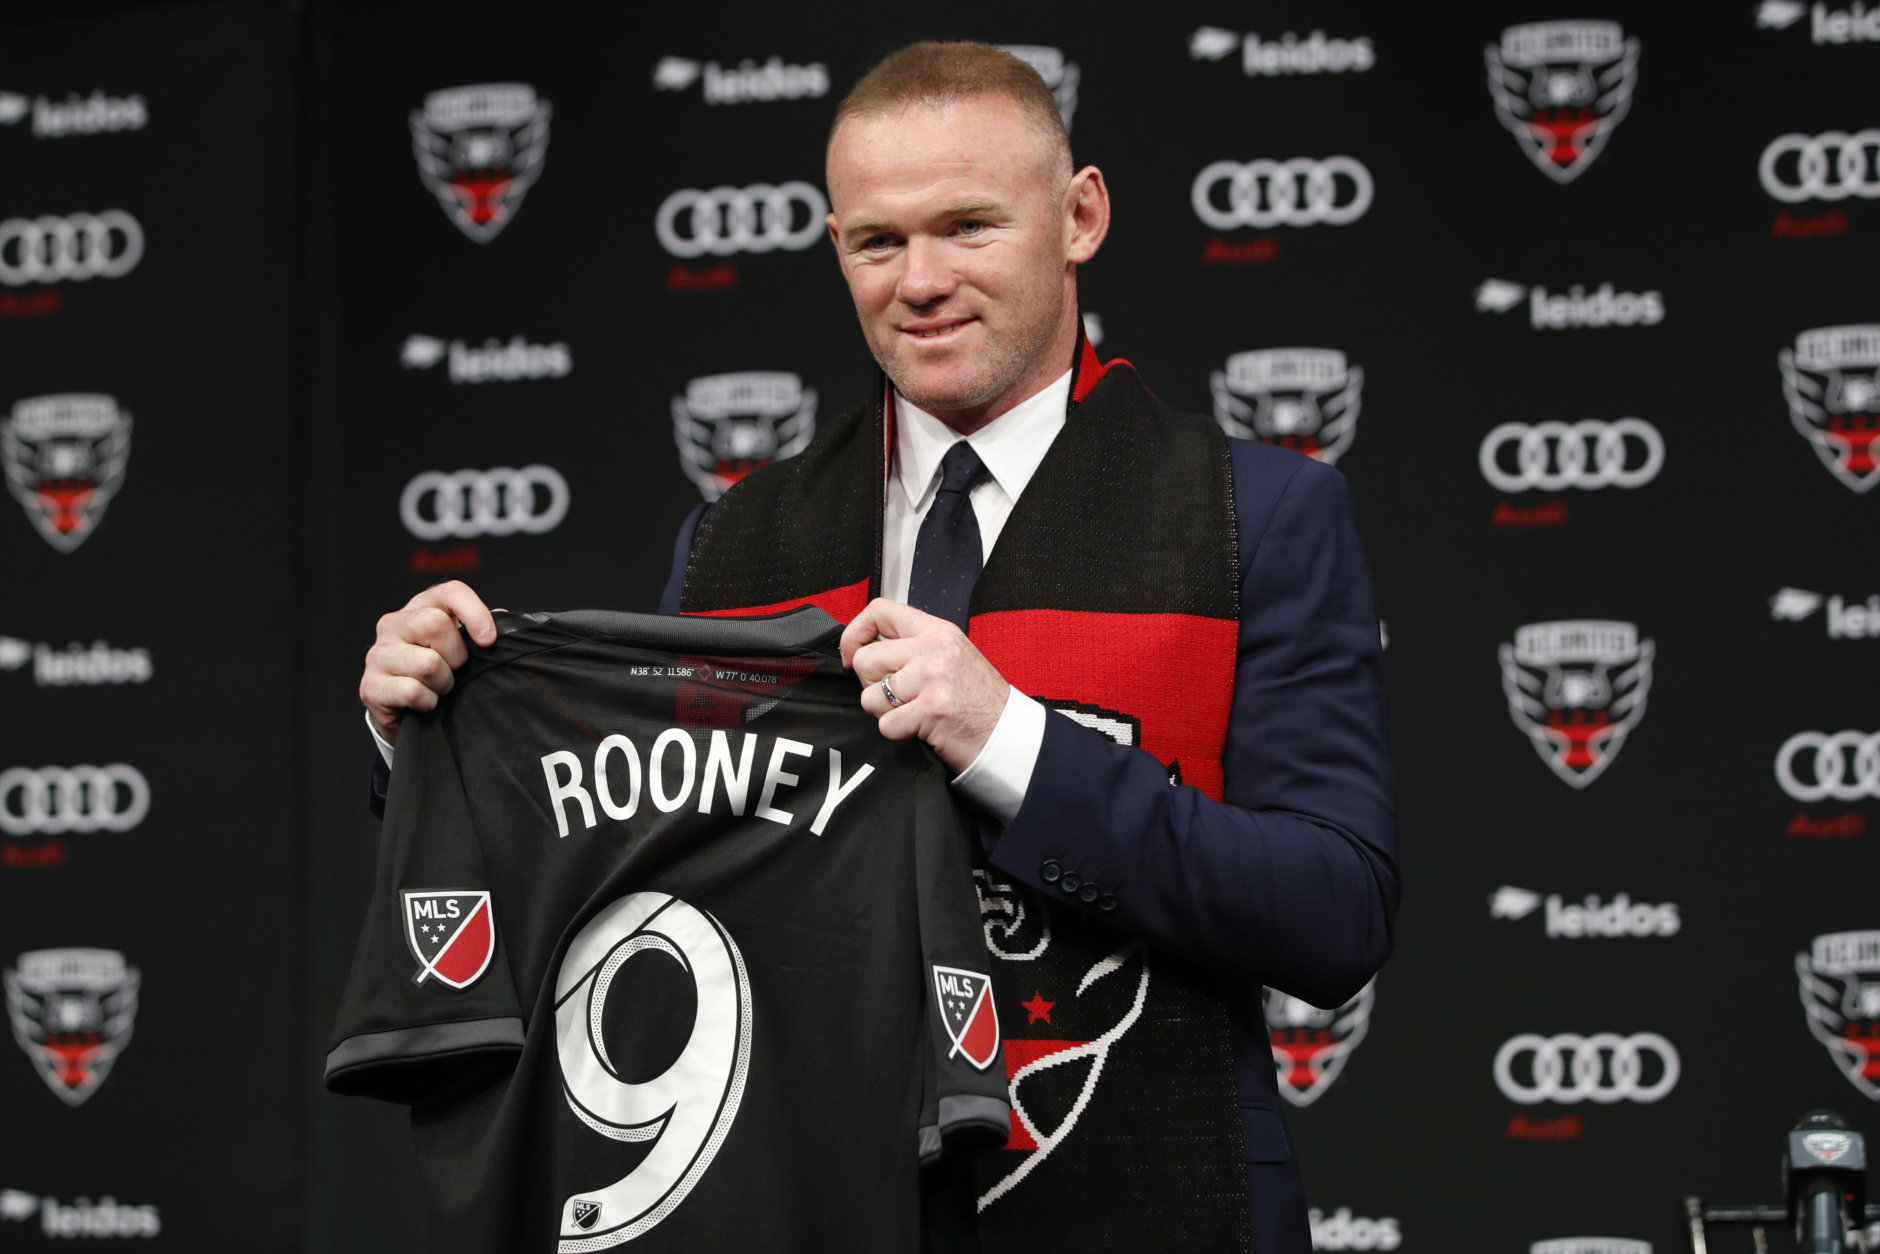 English soccer star Wayne Rooney, the all-time leading scorer for England's national team and Manchester United in the Premier League, poses with his new jersey during a news conference announcing his signing with MLS team D.C. United, Monday, July 2, 2018, at the Newseum in Washington. (AP Photo/Jacquelyn Martin)